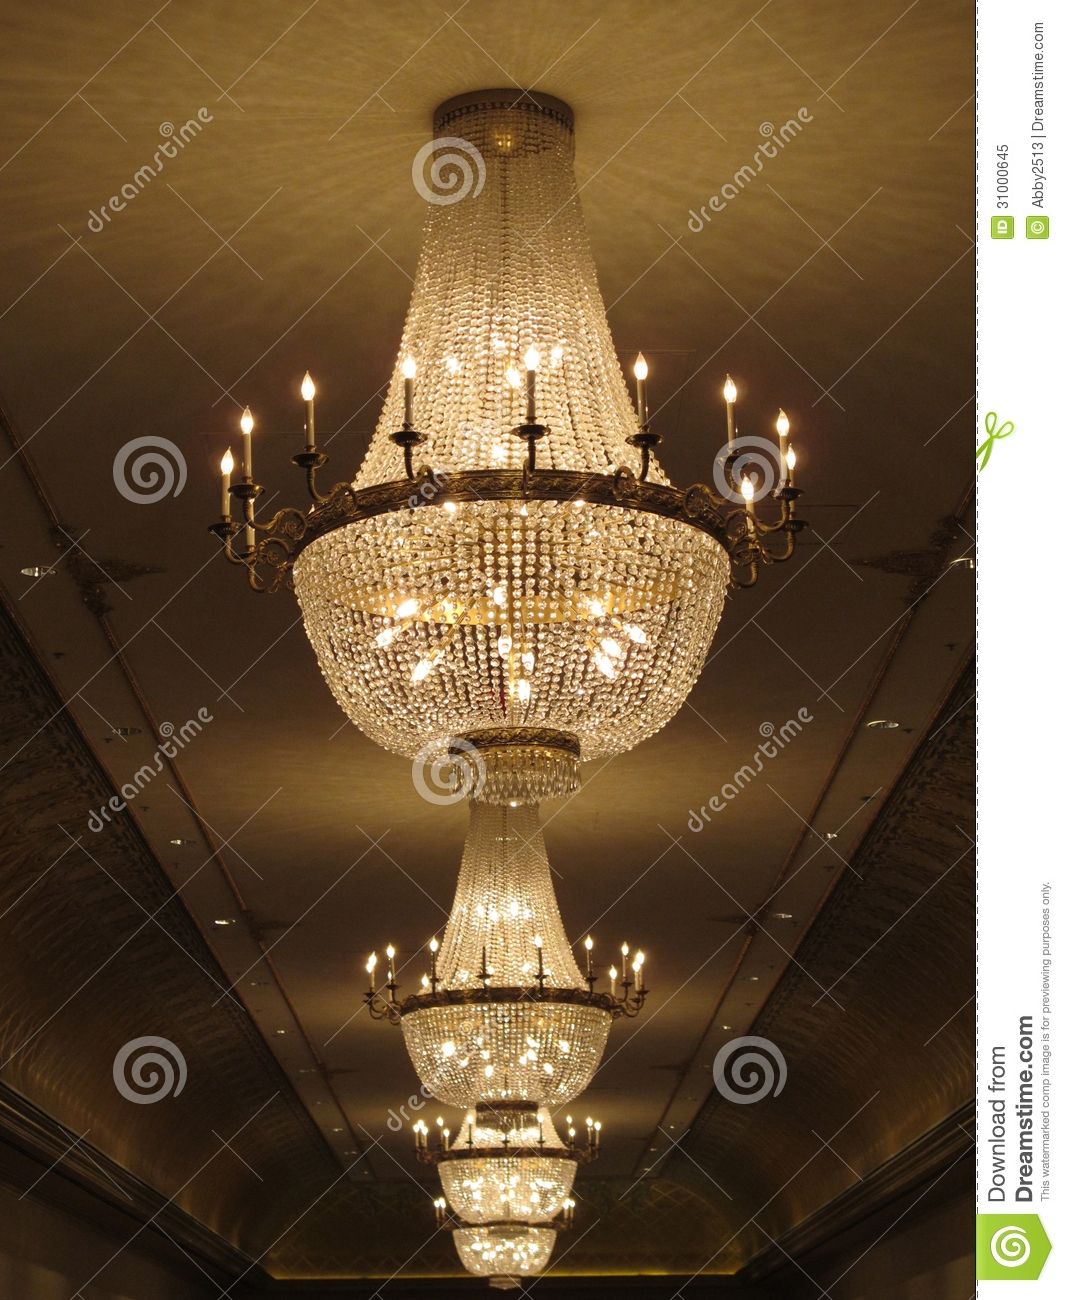 Gorgeous Crystal Chandelier Royalty Free Stock Photo Image 31000645 Regarding Ballroom Chandeliers (View 7 of 15)